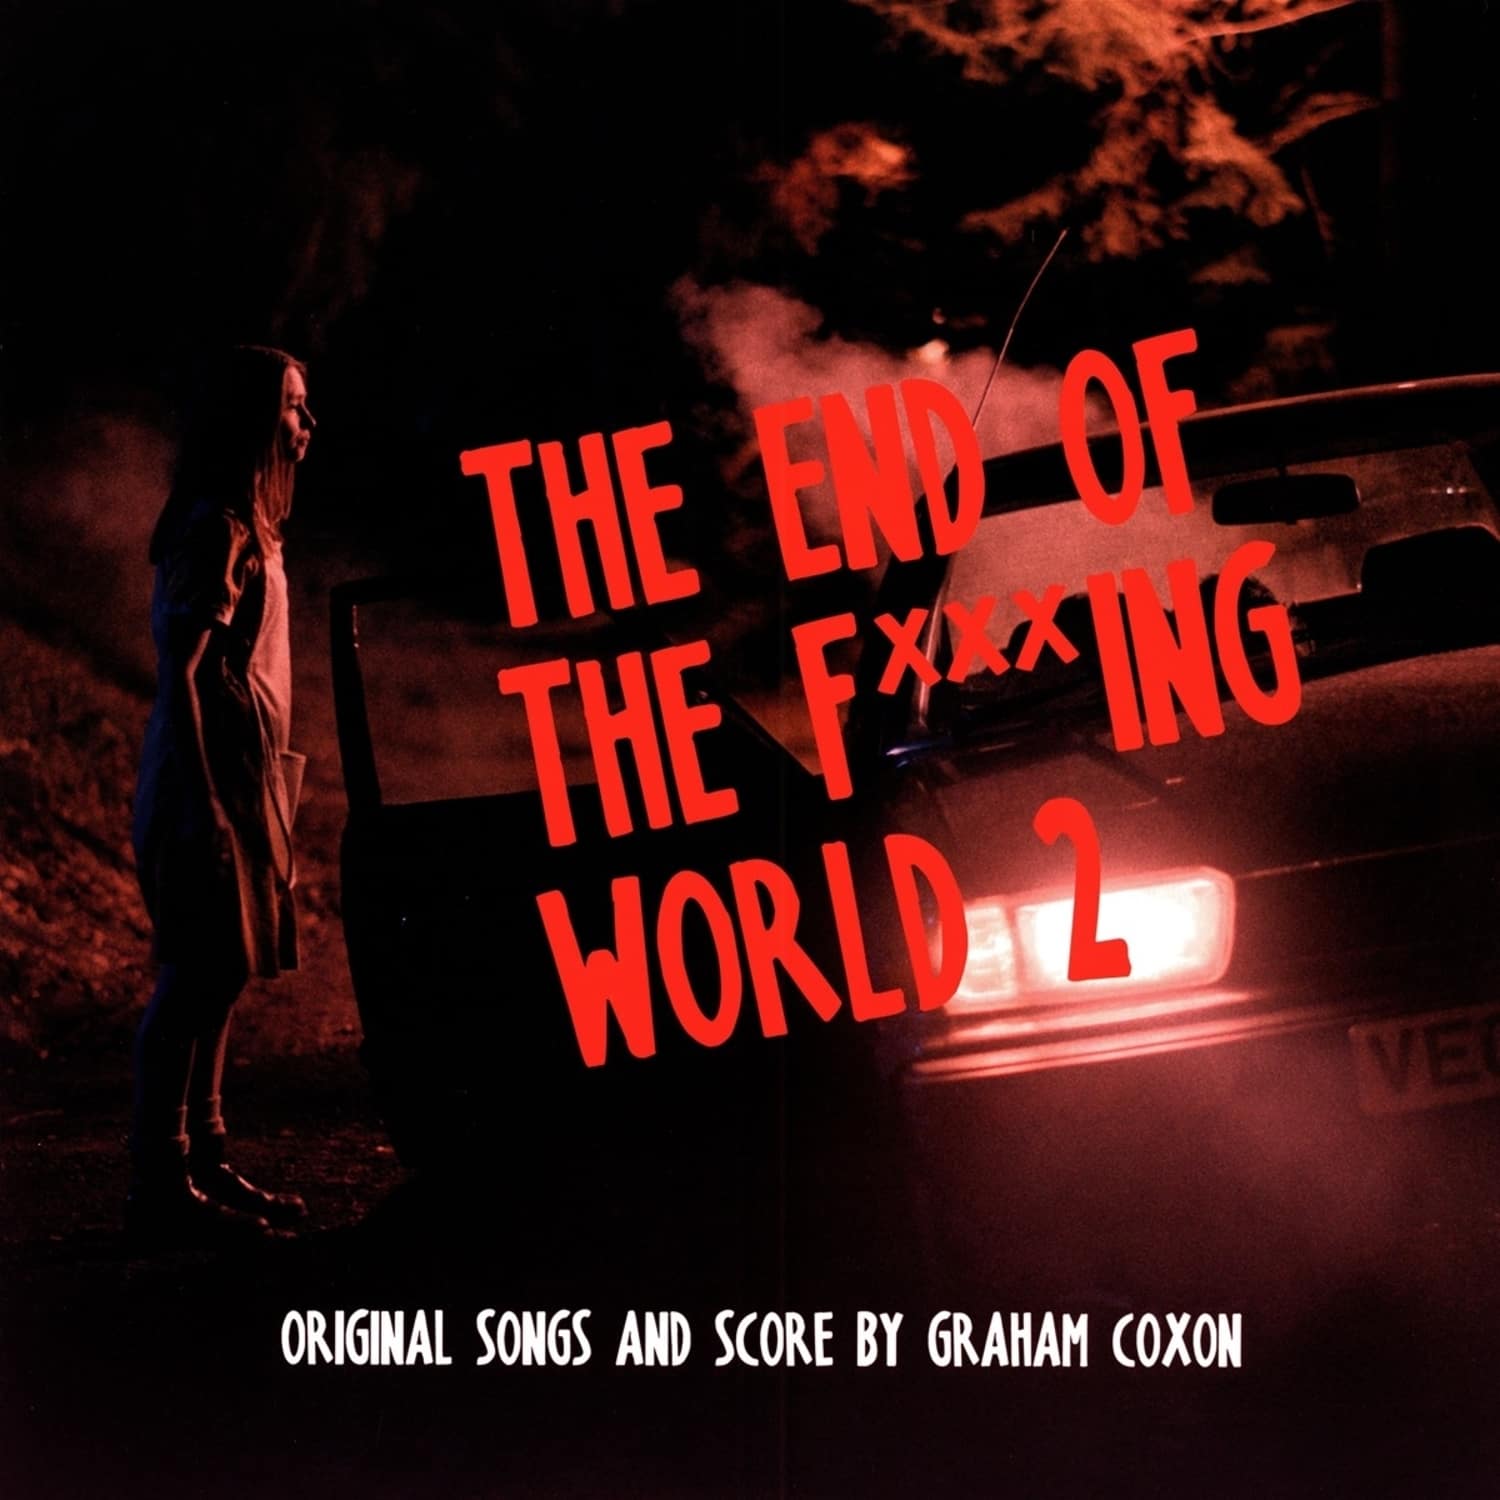 OST / Graham Coxon - THE END OF THE F***ING WORLD 2